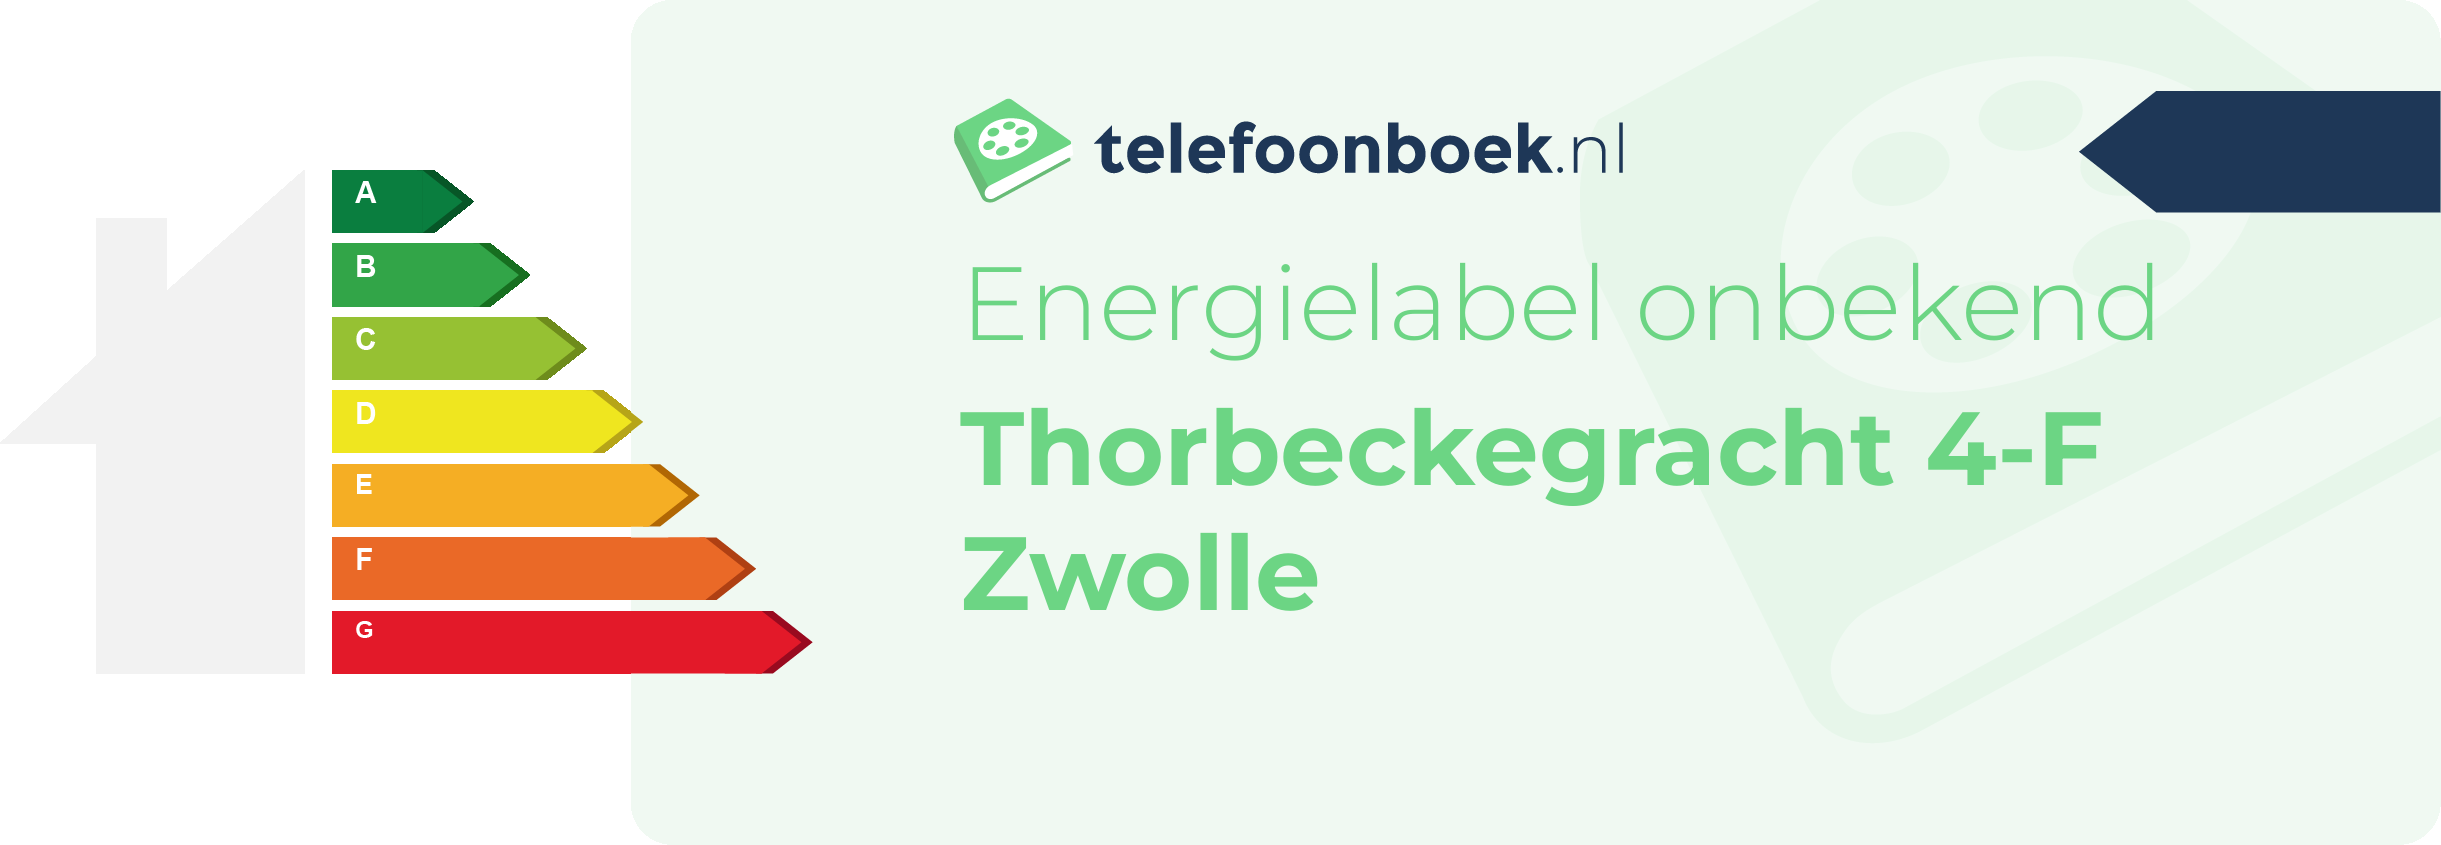 Energielabel Thorbeckegracht 4-F Zwolle